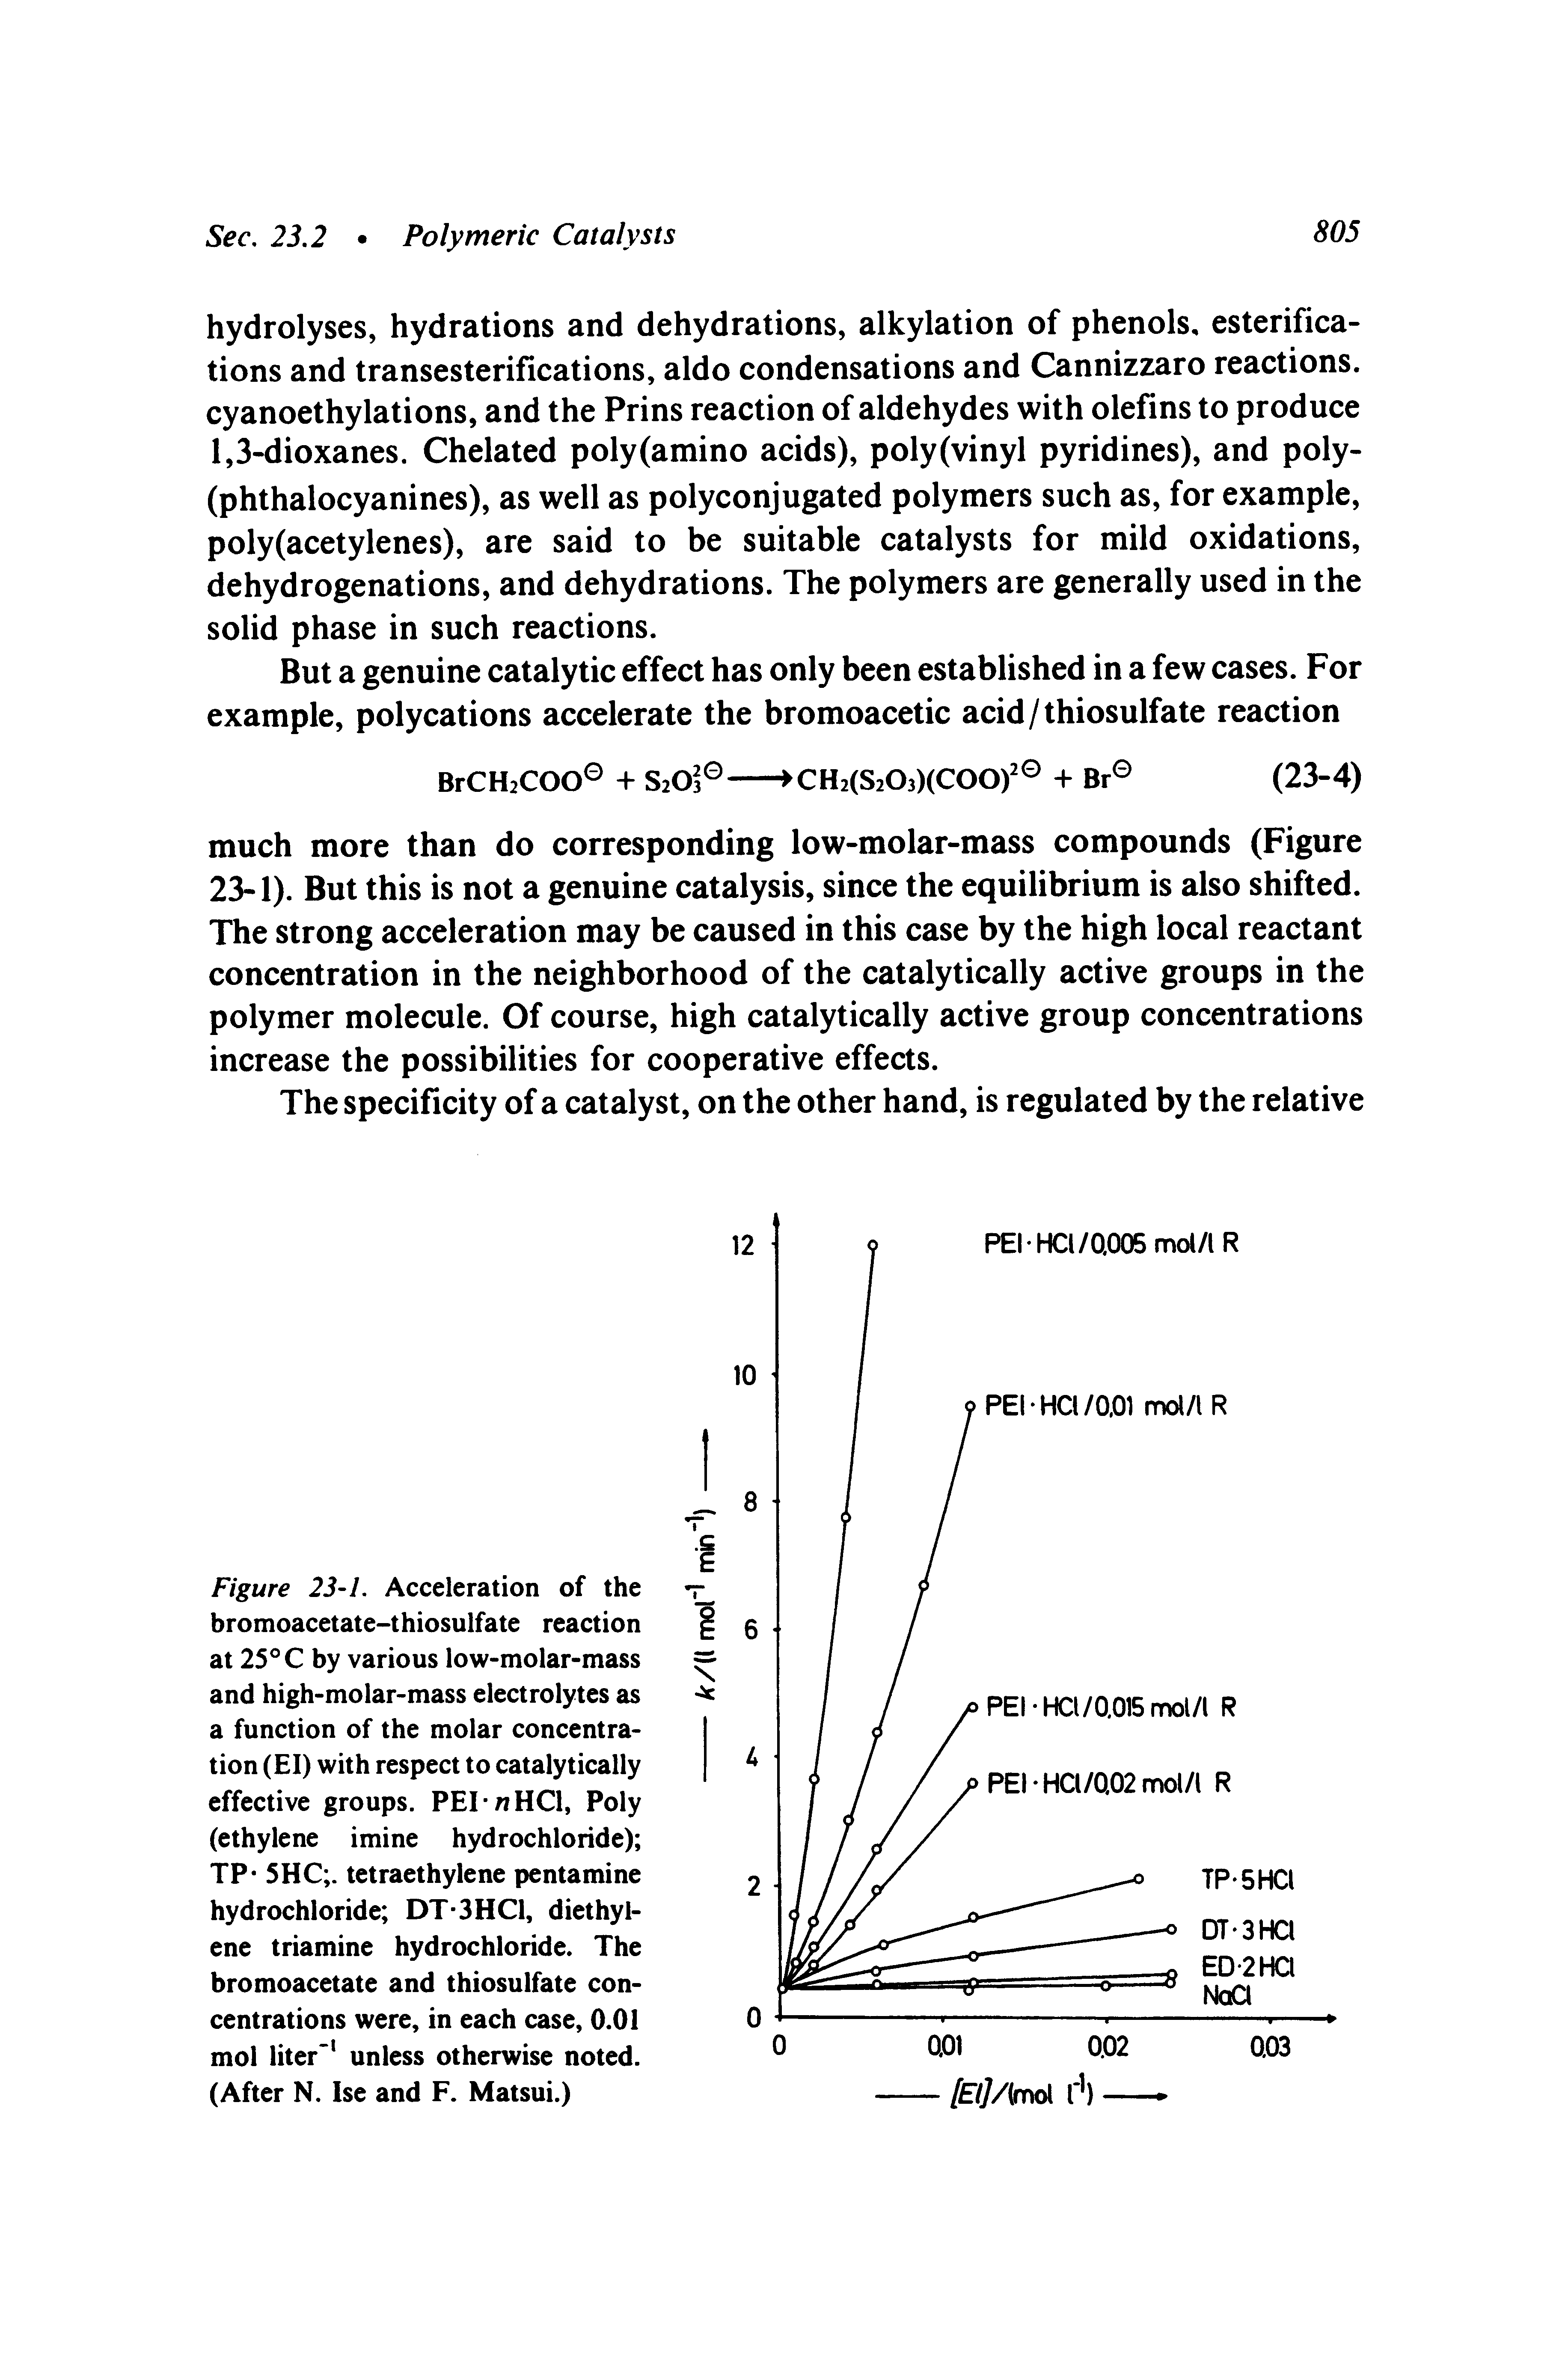 Figure 23-1. Acceleration of the bromoacetate-thiosulfate reaction at 25 C by various low-molar-mass and high-molar-mass electrolytes as a function of the molar concentration (El) with respect to catalytically effective groups. PEI nHCl, Poly (ethylene imine hydrochloride) TP 5HC . tetraethylene pentamine hydrochloride DT-3HC1, diethylene triamine hydrochloride. The bromoacetate and thiosulfate concentrations were, in each case, 0.01 mol liter unless otherwise noted. (After N. Ise and F. Matsui.)...